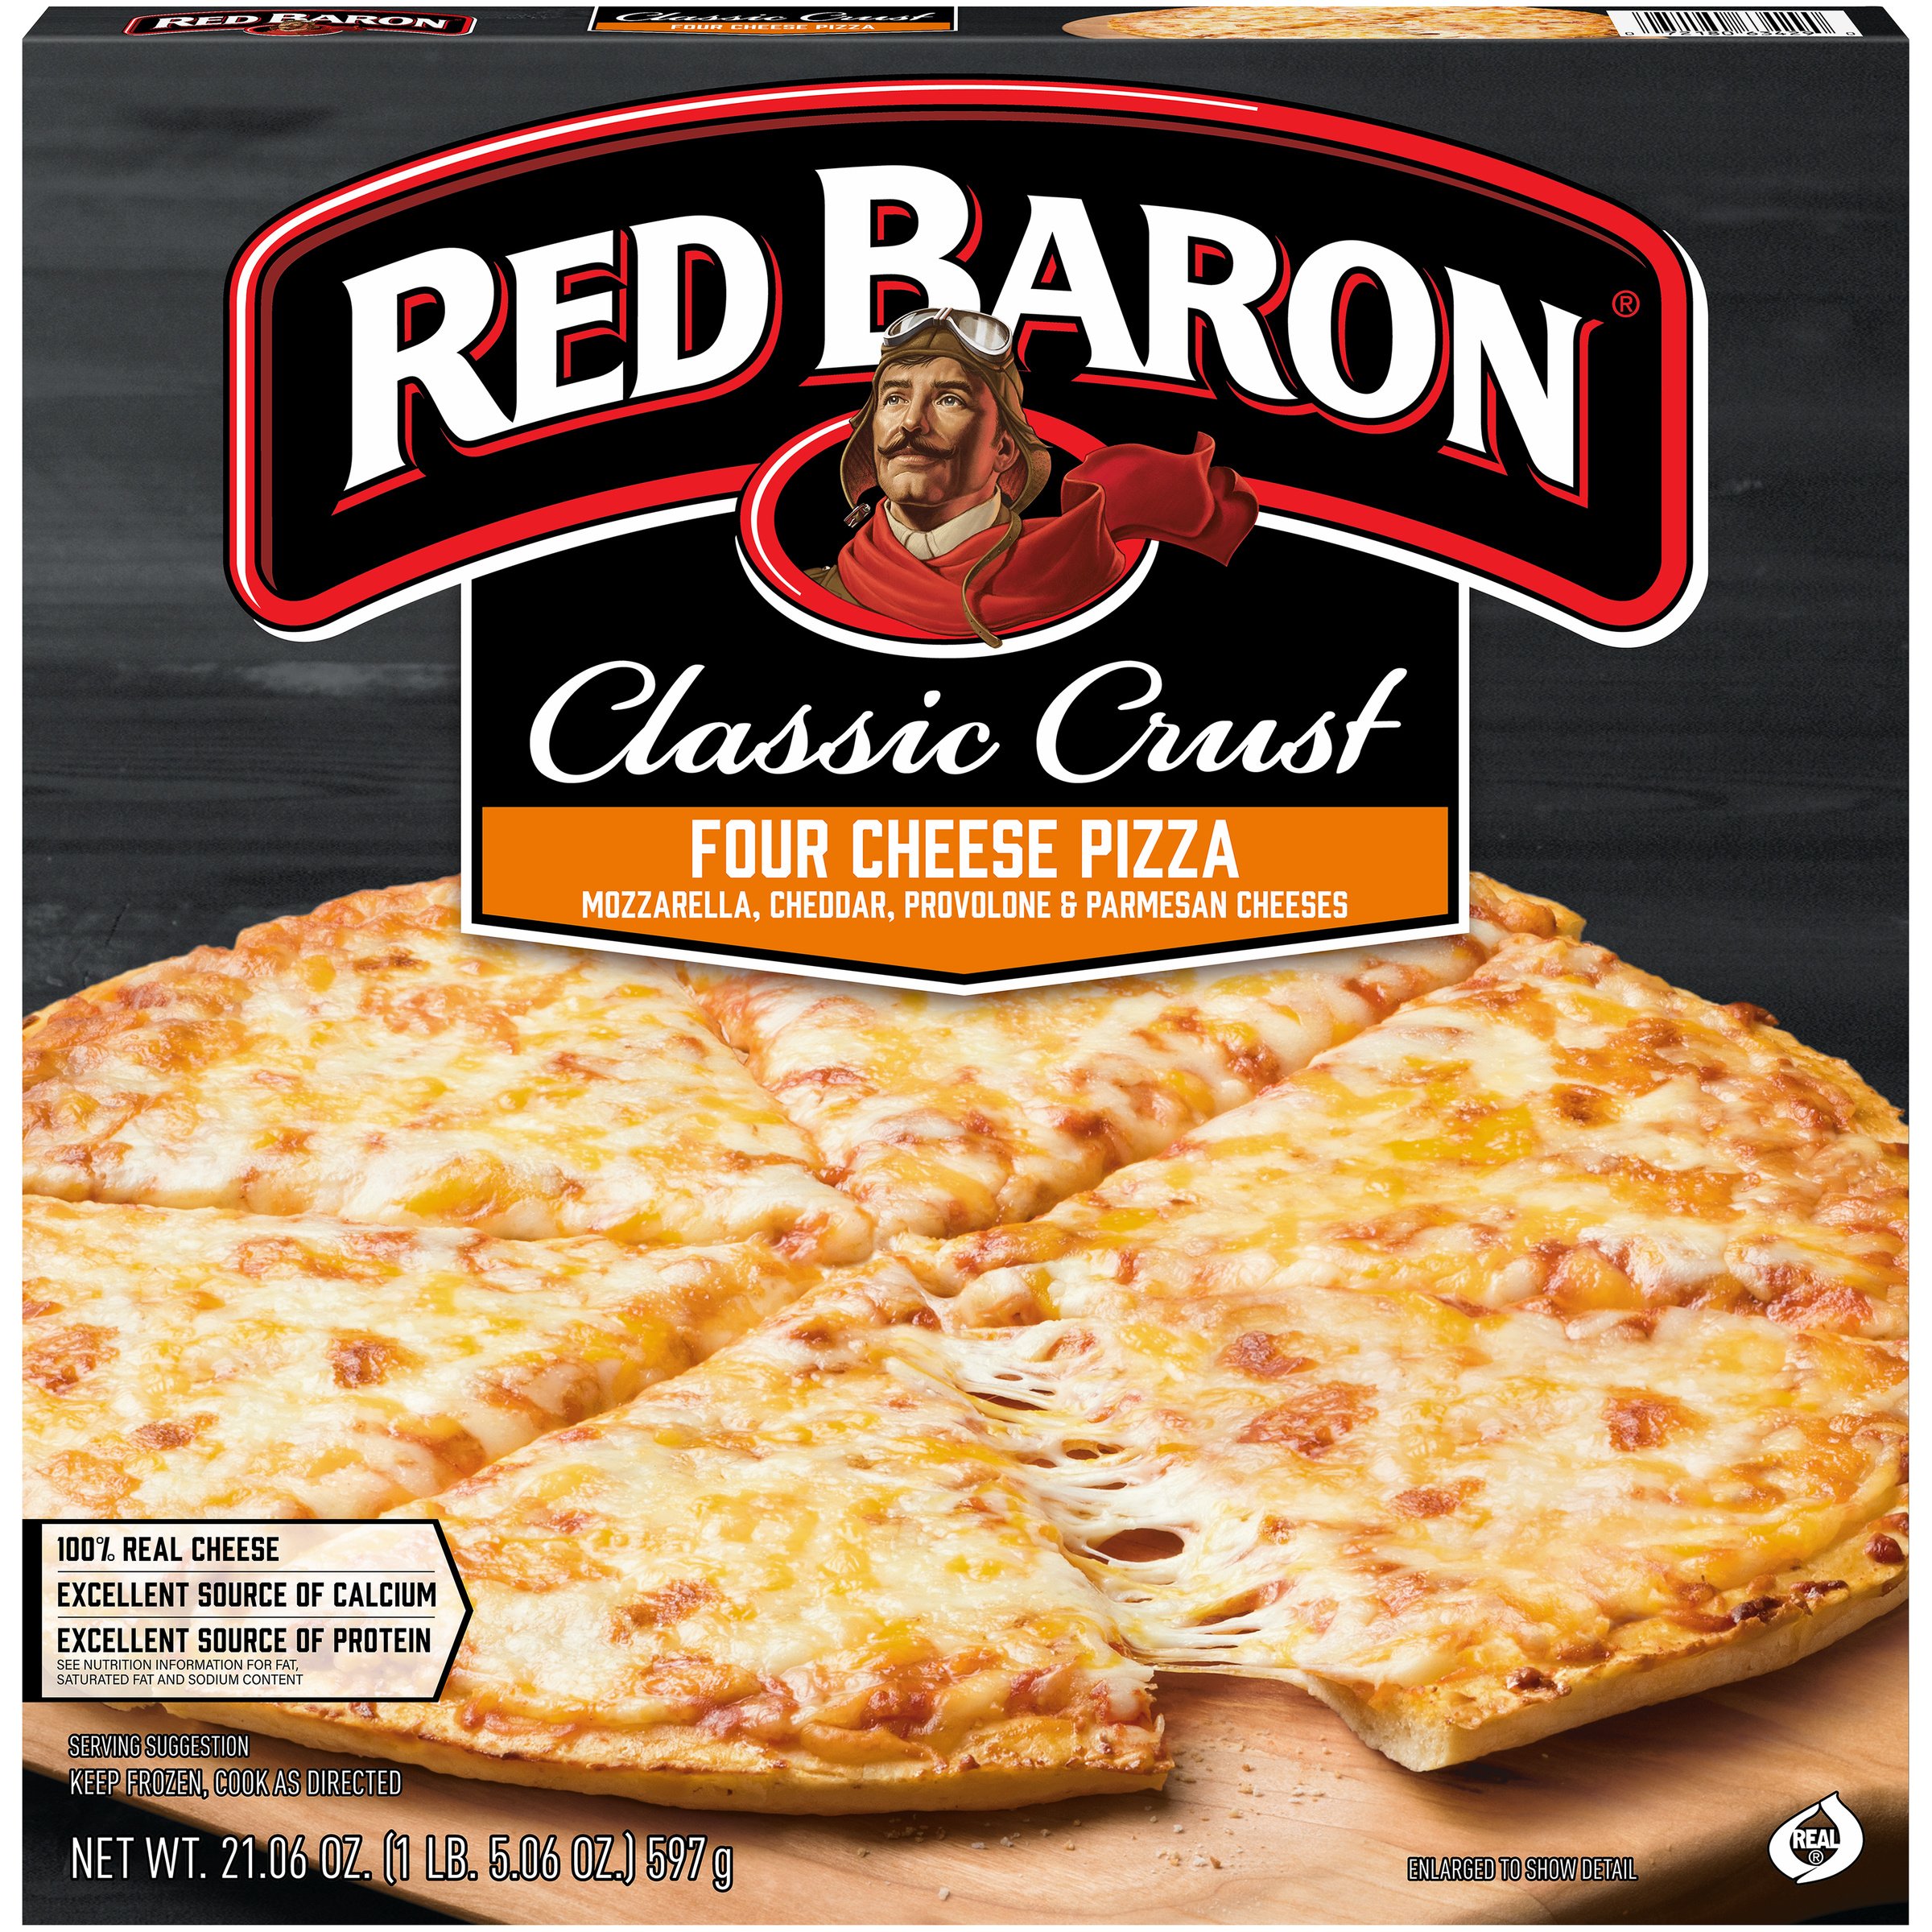 Classic Crust Four-Cheese Pizza